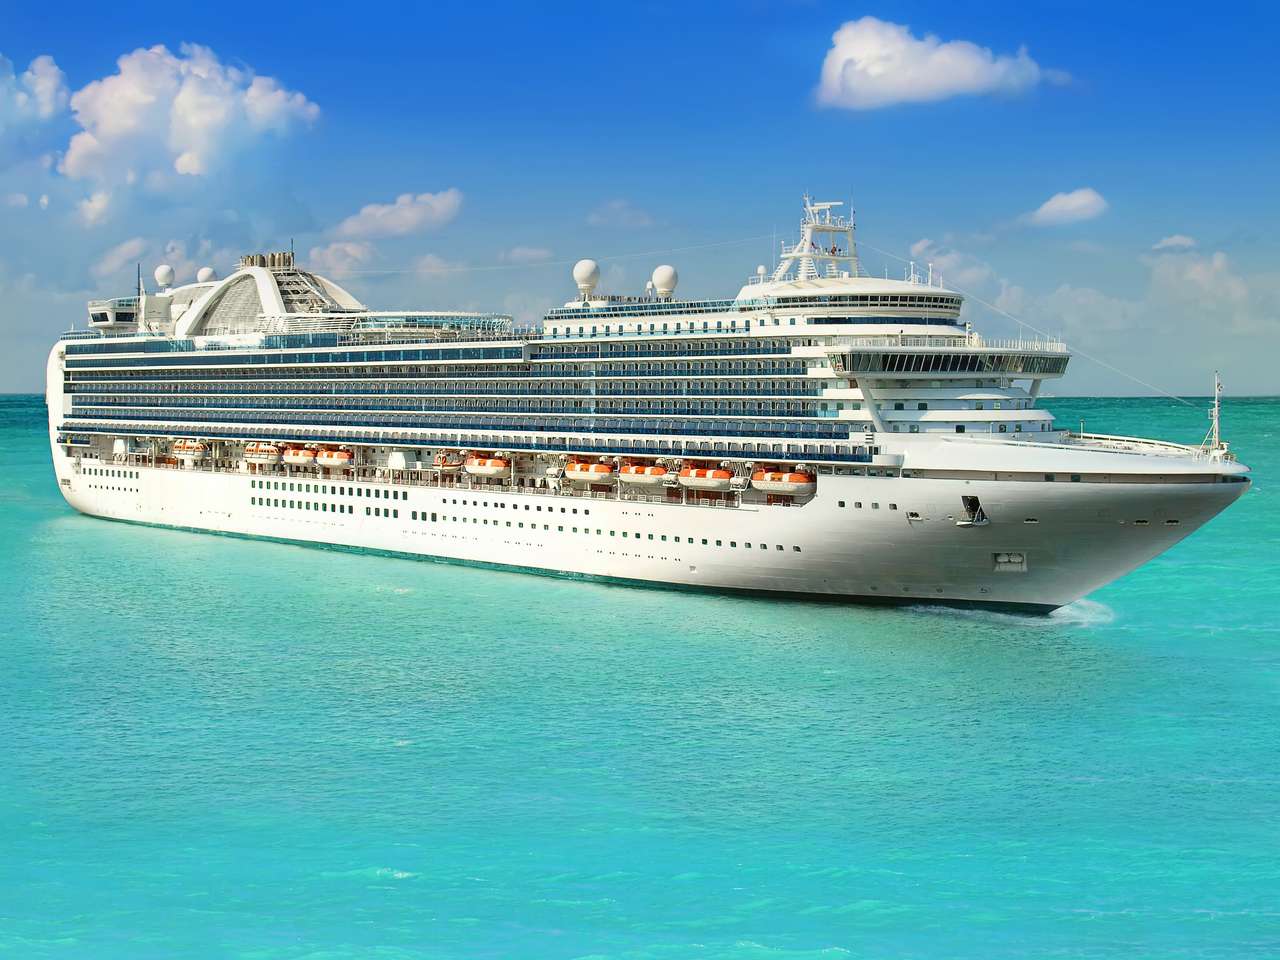 Luxury Cruise Ship Sailing from Port jigsaw puzzle online